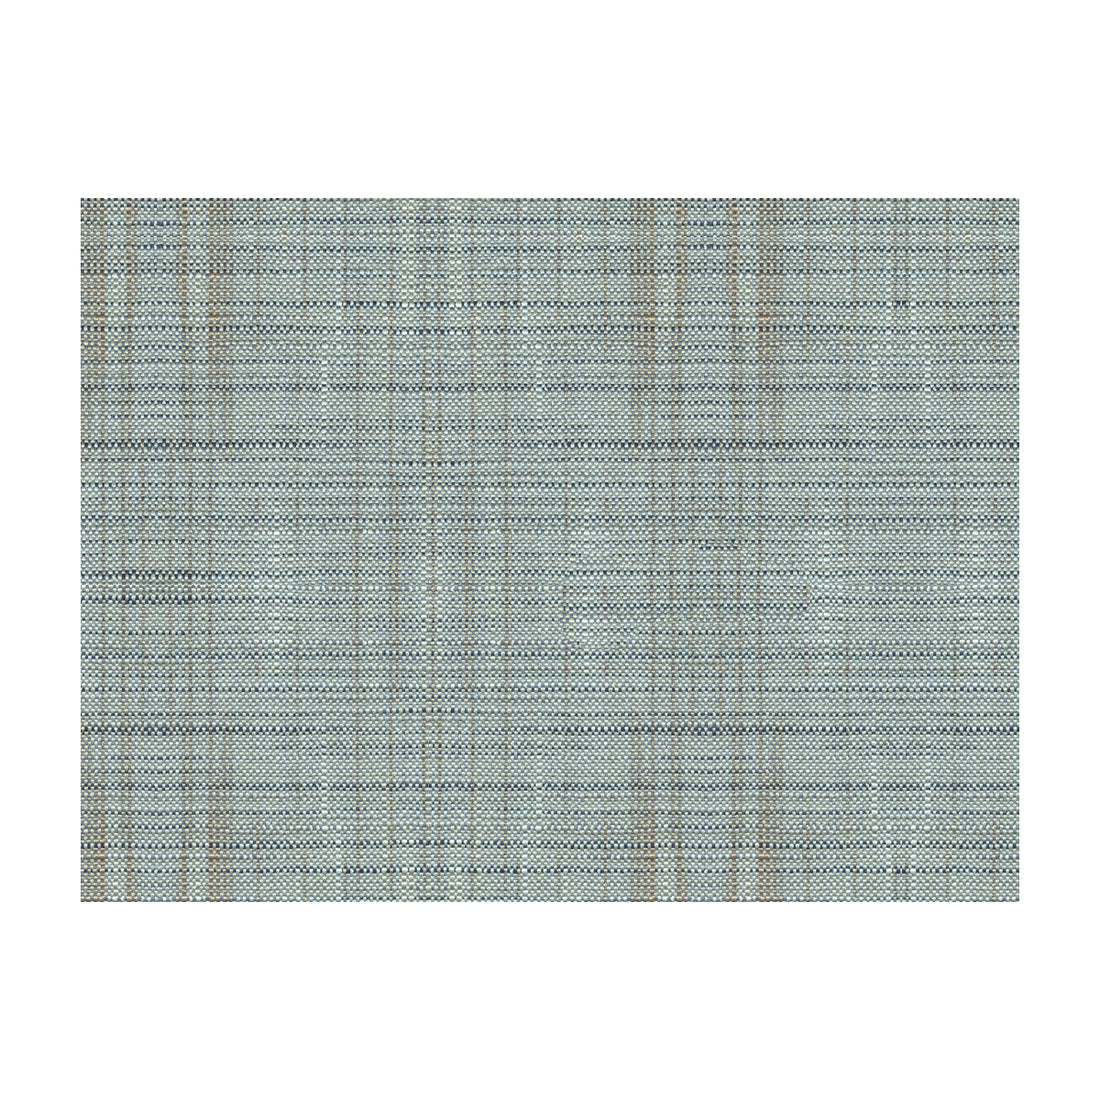 Neilson fabric in denim color - pattern 33409.516.0 - by Kravet Basics in the Jeffrey Alan Marks collection